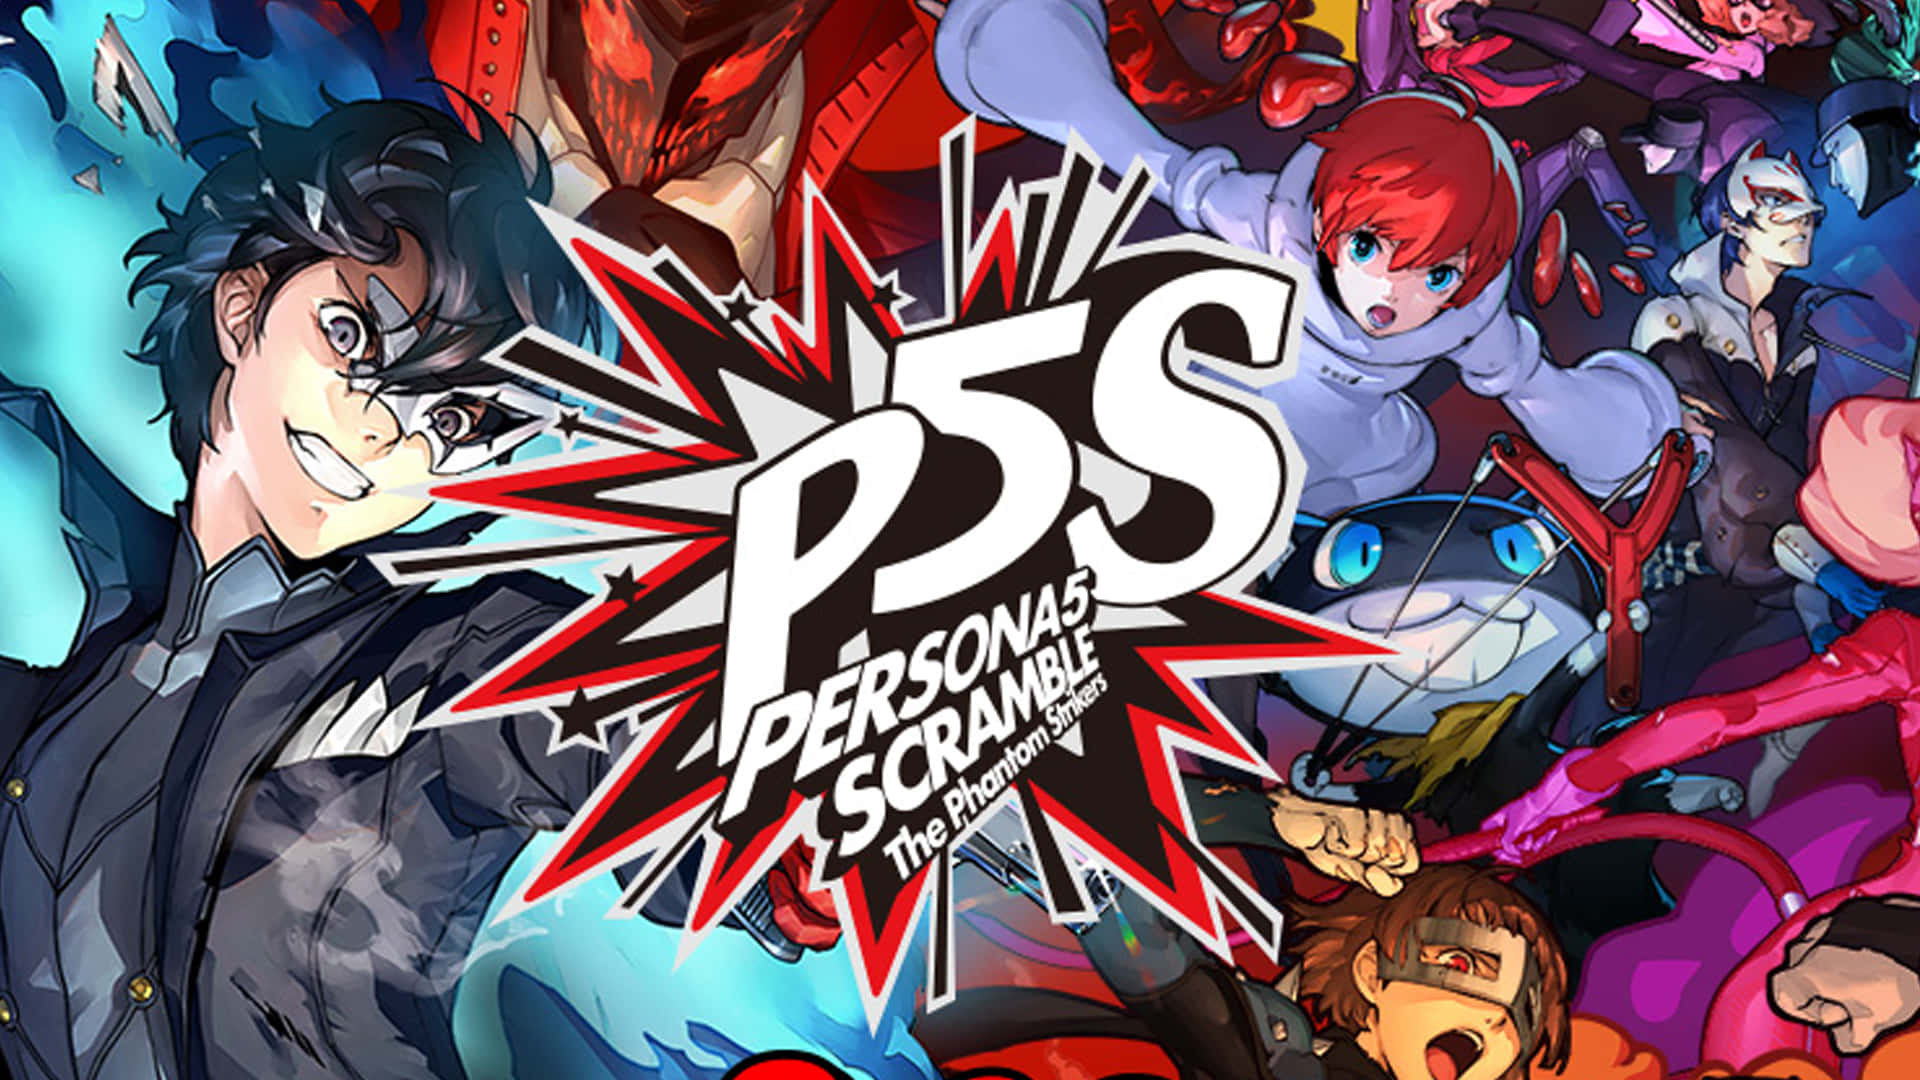 "The Official Logo of Persona 5" Wallpaper